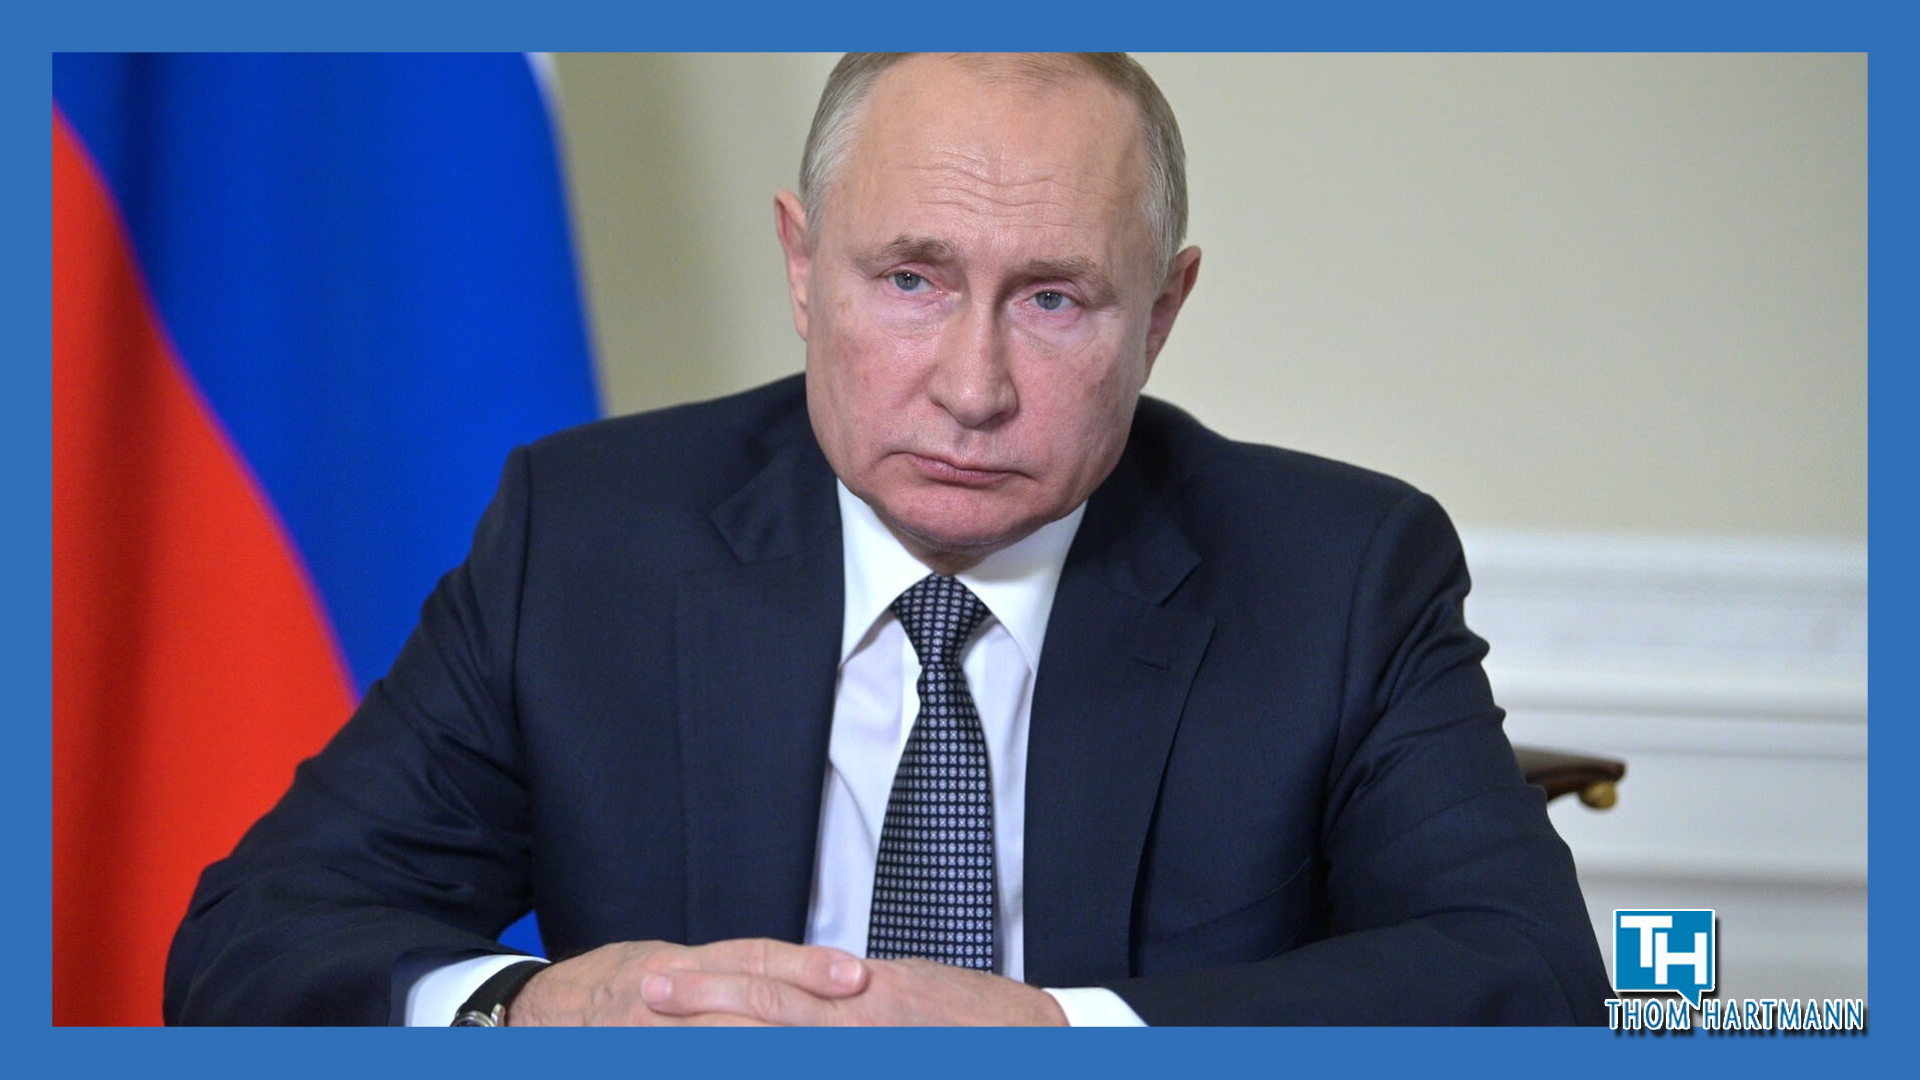 Will OPEC Pull World Economy Into Depression For Putin? Featuring Richard Wolff